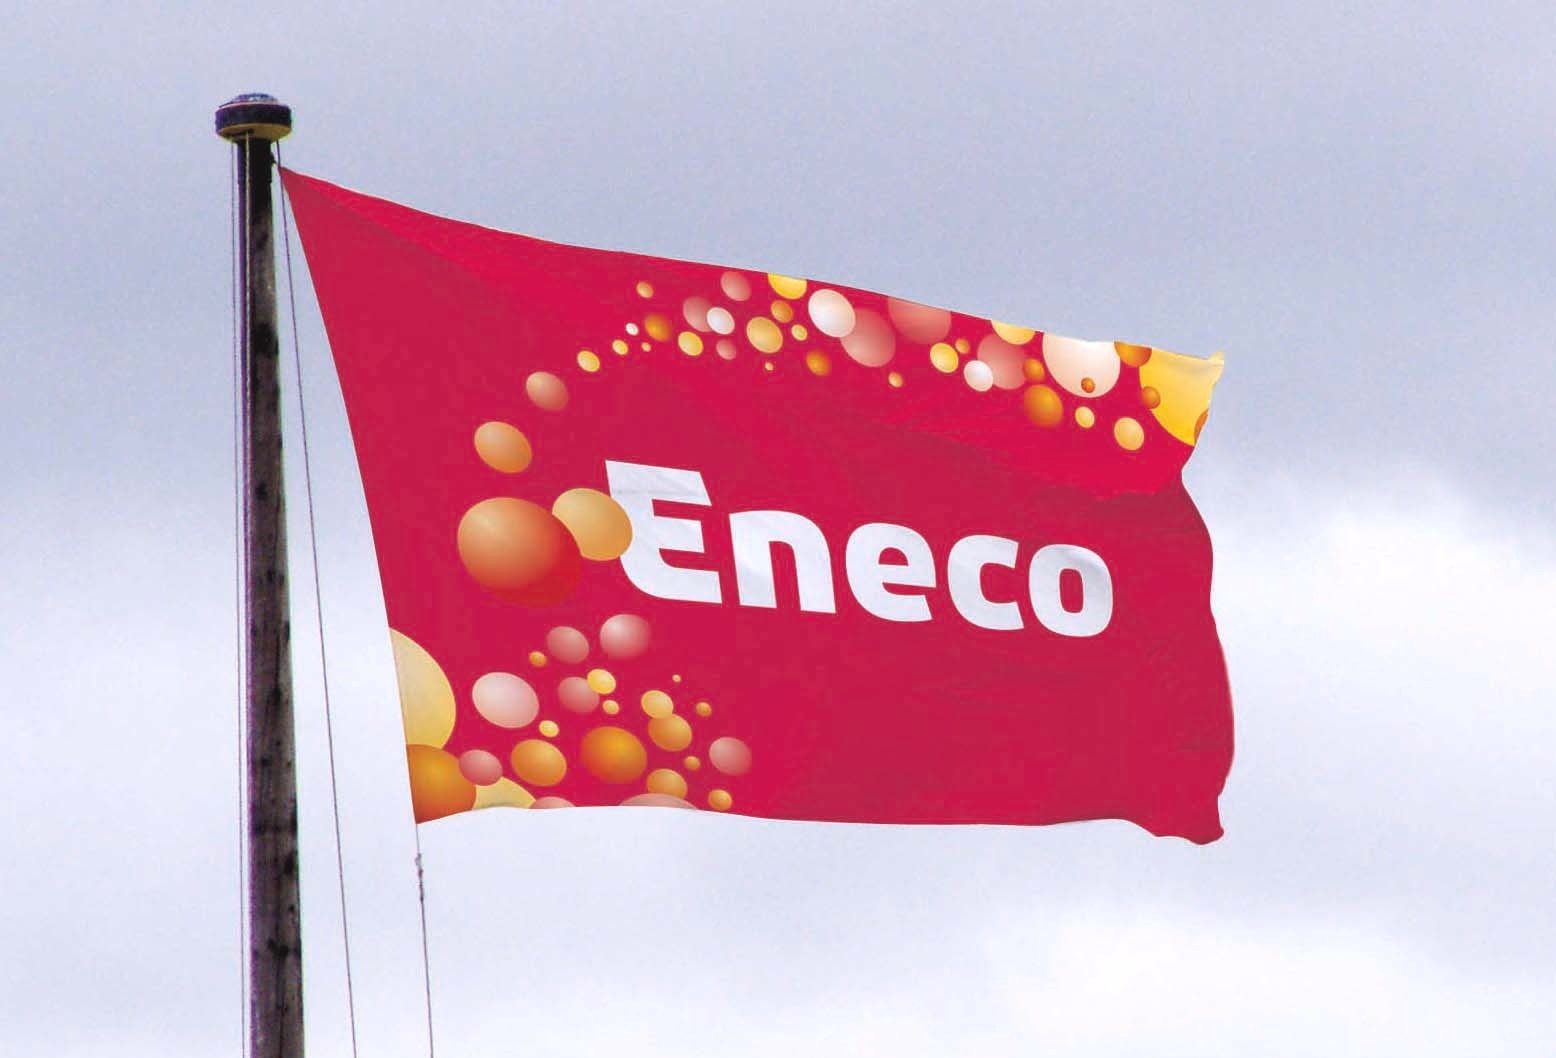 The Netherlands: Eneco Gets Subsidy for Offshore Wind Farm Development